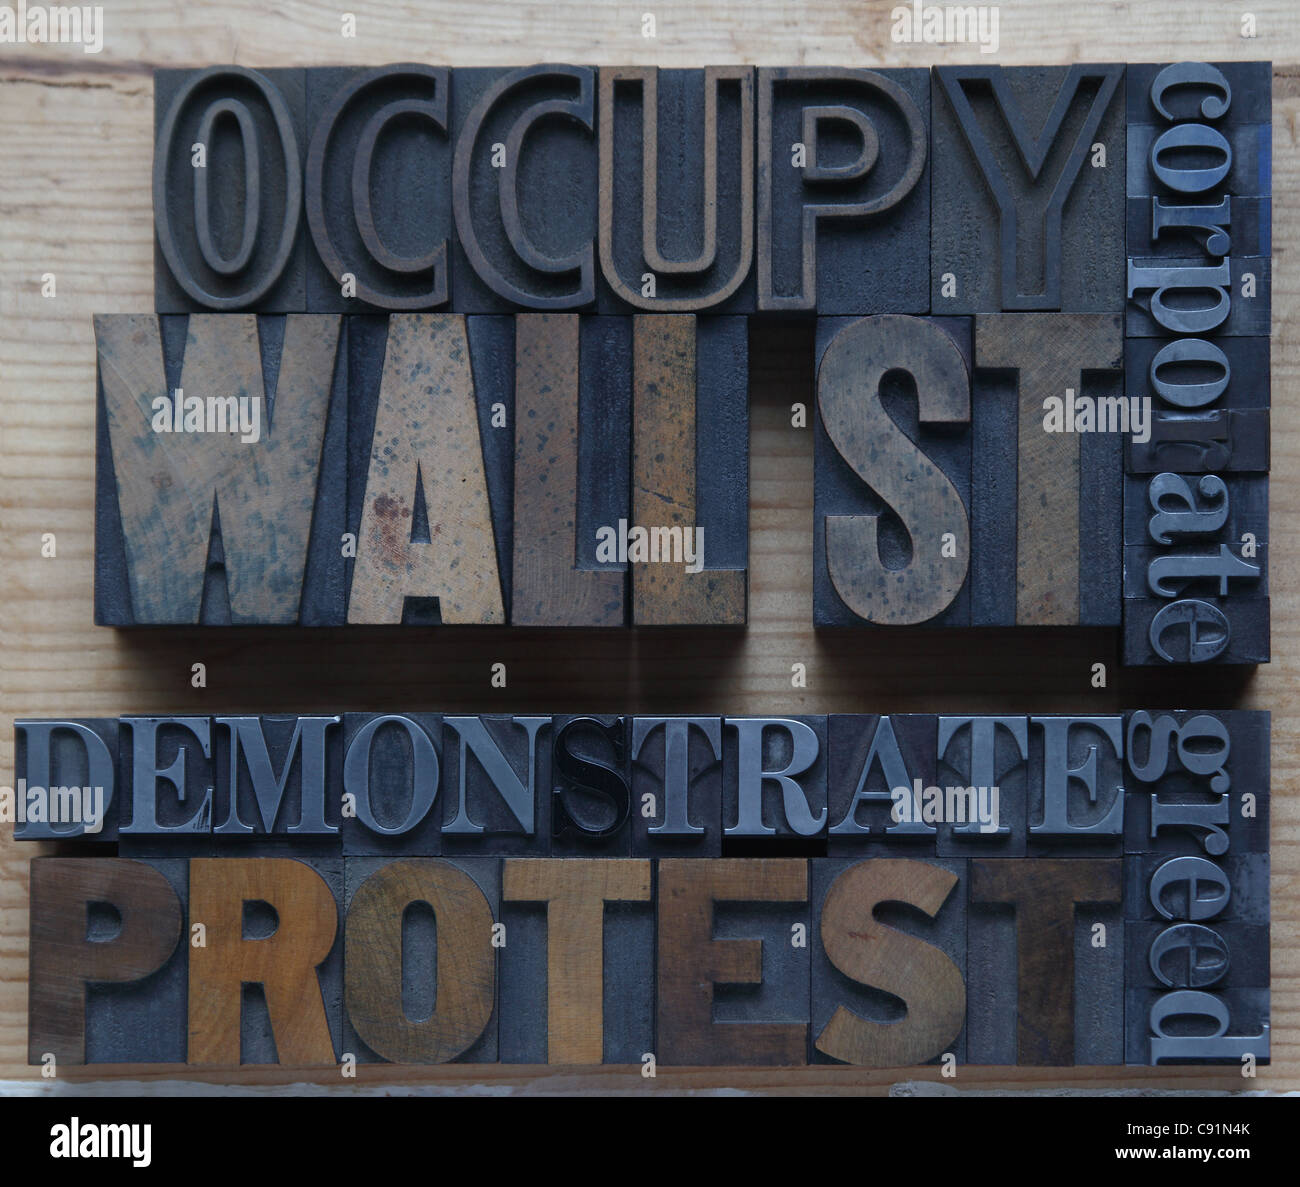 words associated with the Occupy Wall St. movement Stock Photo